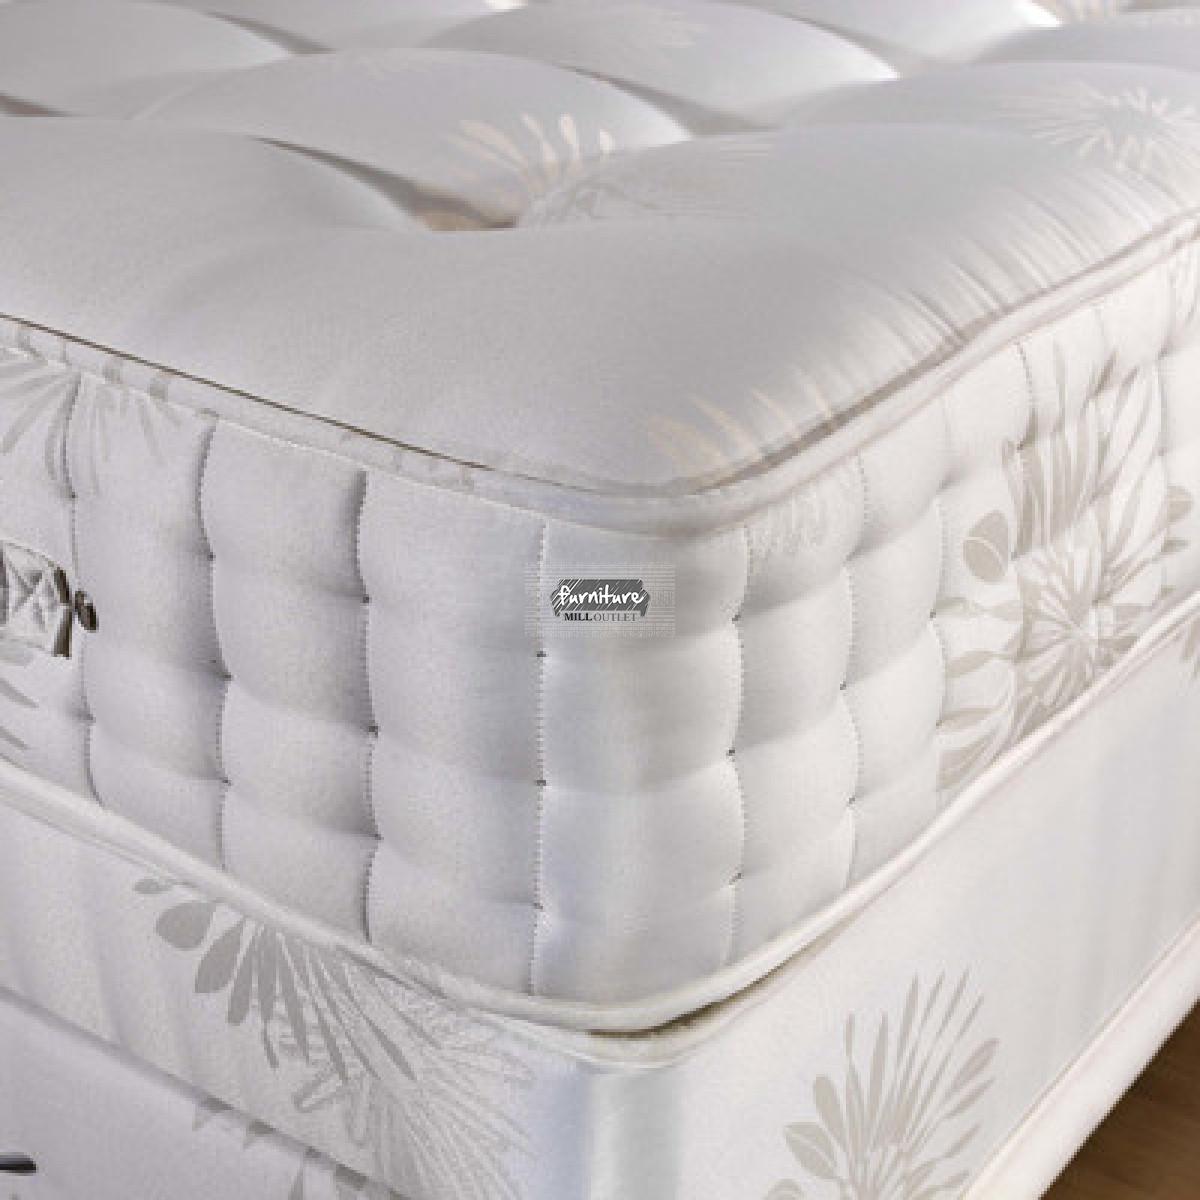 Wordsworth 1400 Pocket Sprung Mattress Double | Furniture Mill Outlet